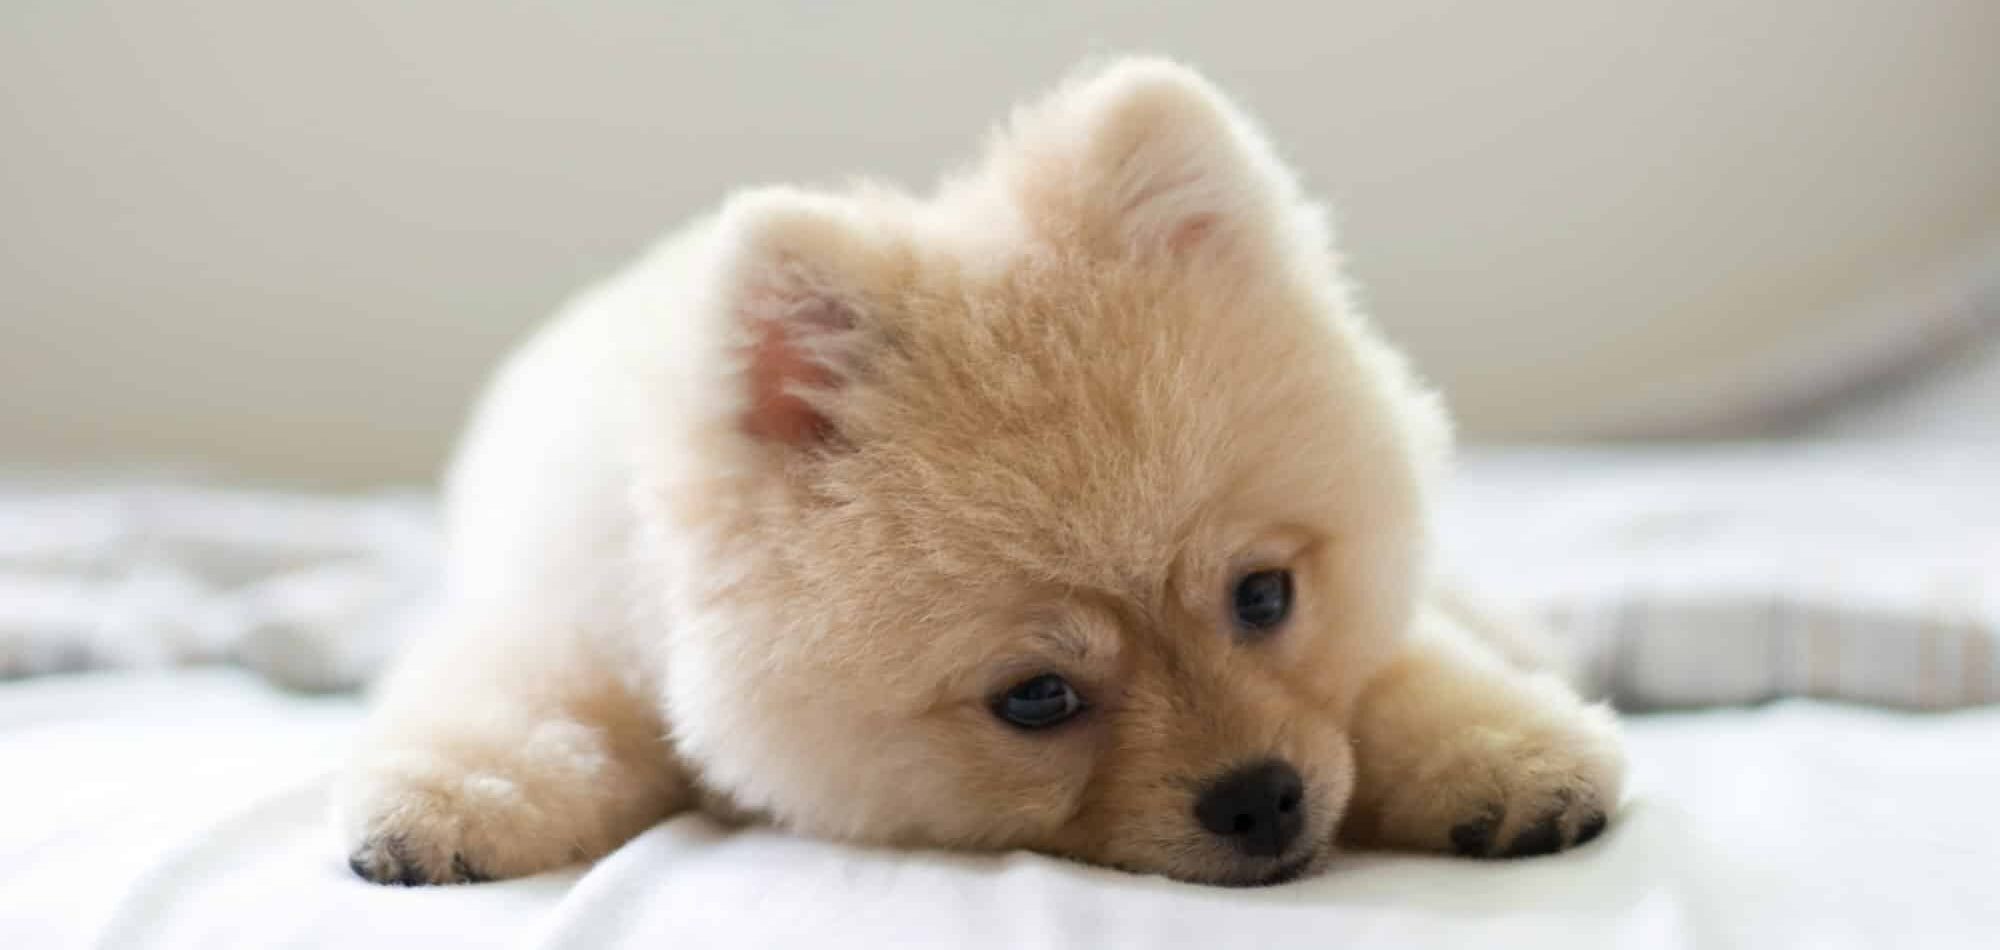 Cute pomeranian puppy lying on the bed